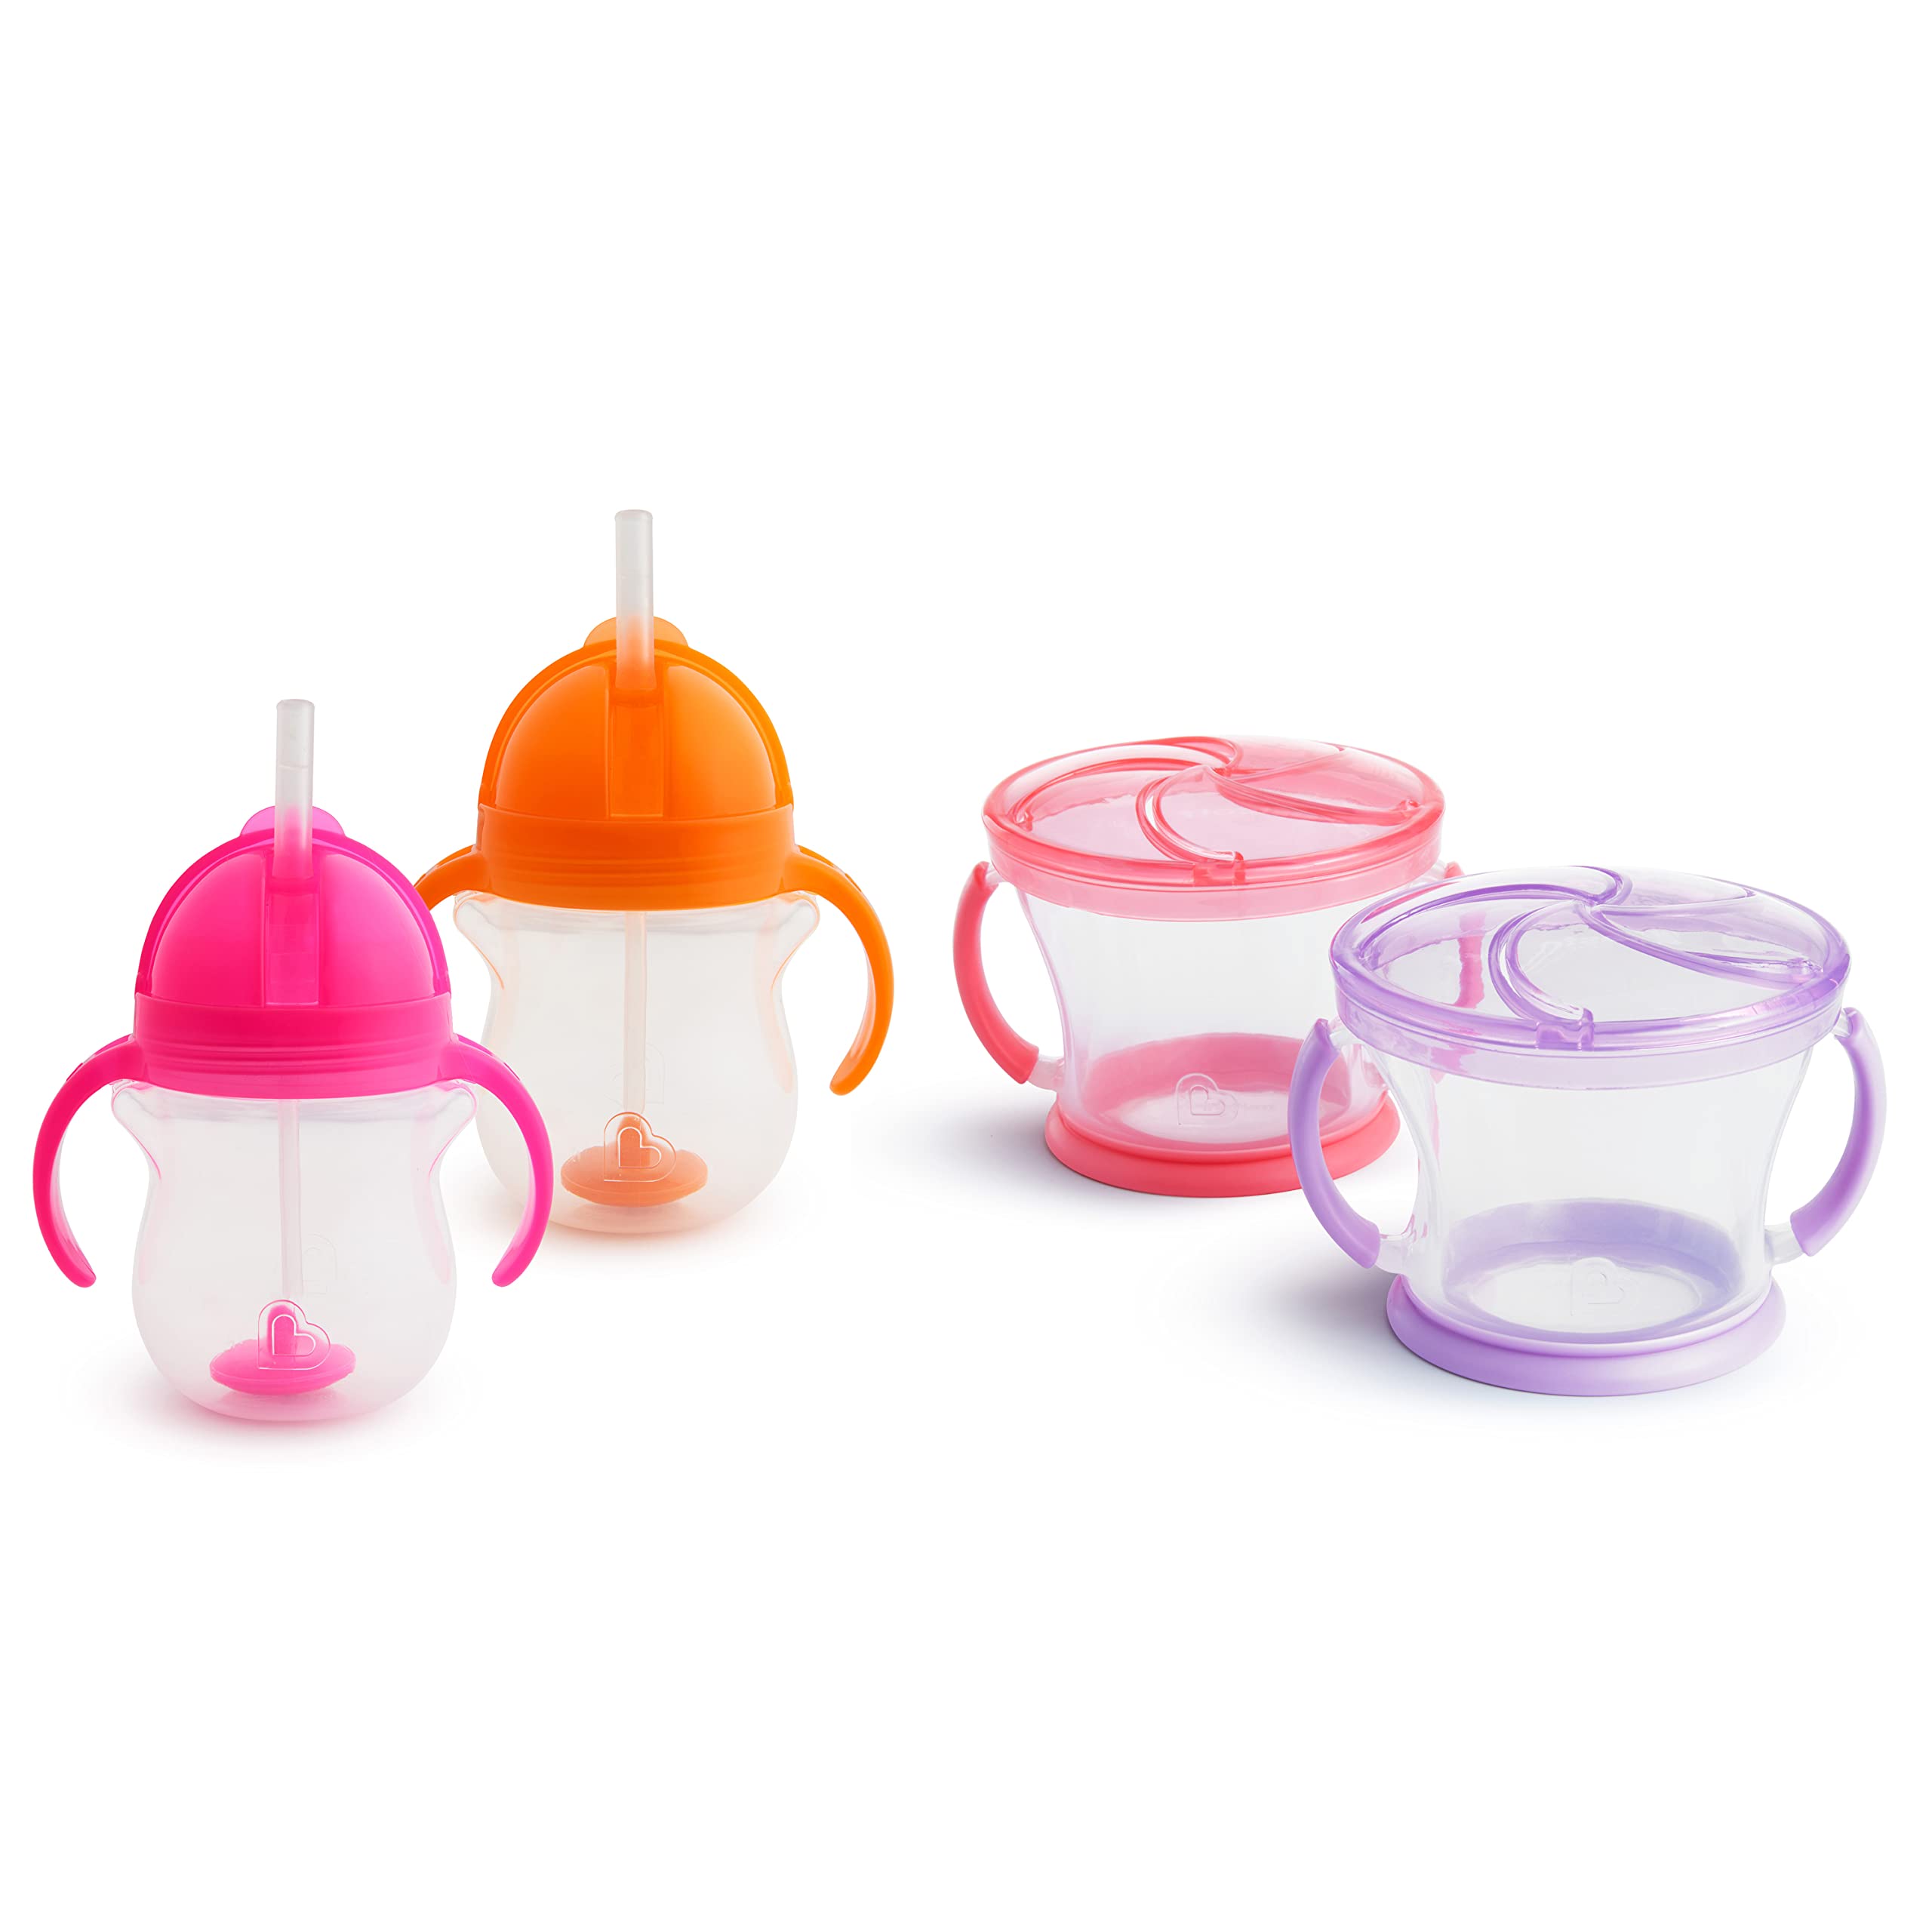 Munchkin Click Lock Weighted Straw Flexi Cup - 7 Oz(Colors May